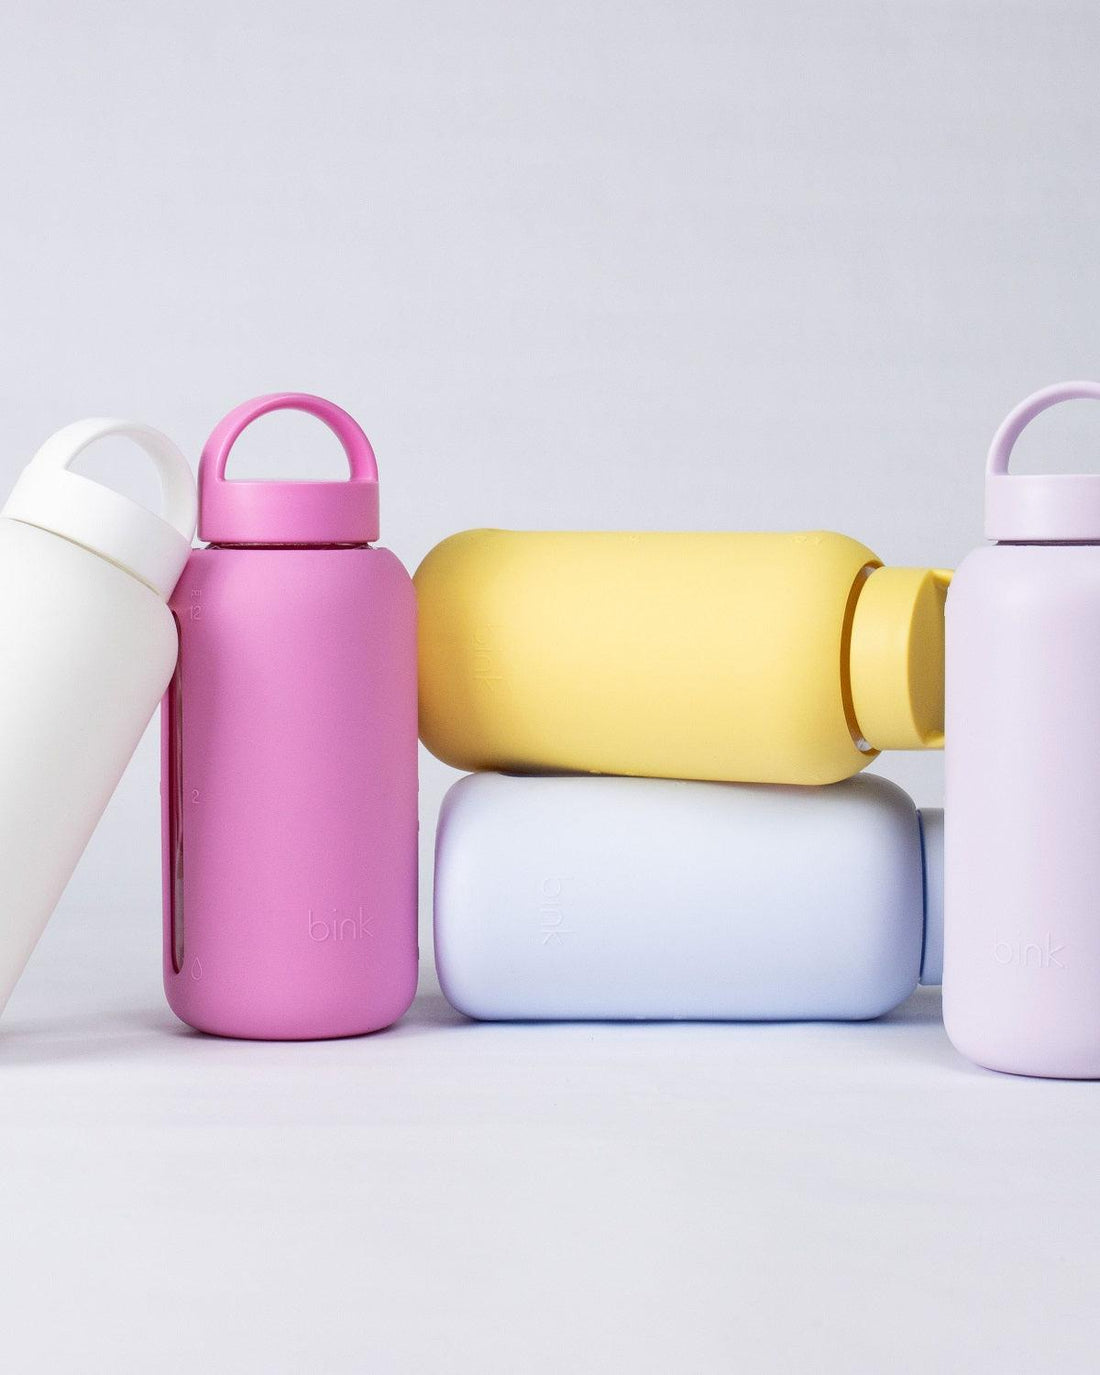 Bink water bottles to help keep you hydrated during pregnancy and nursing. Yoho Baby & co